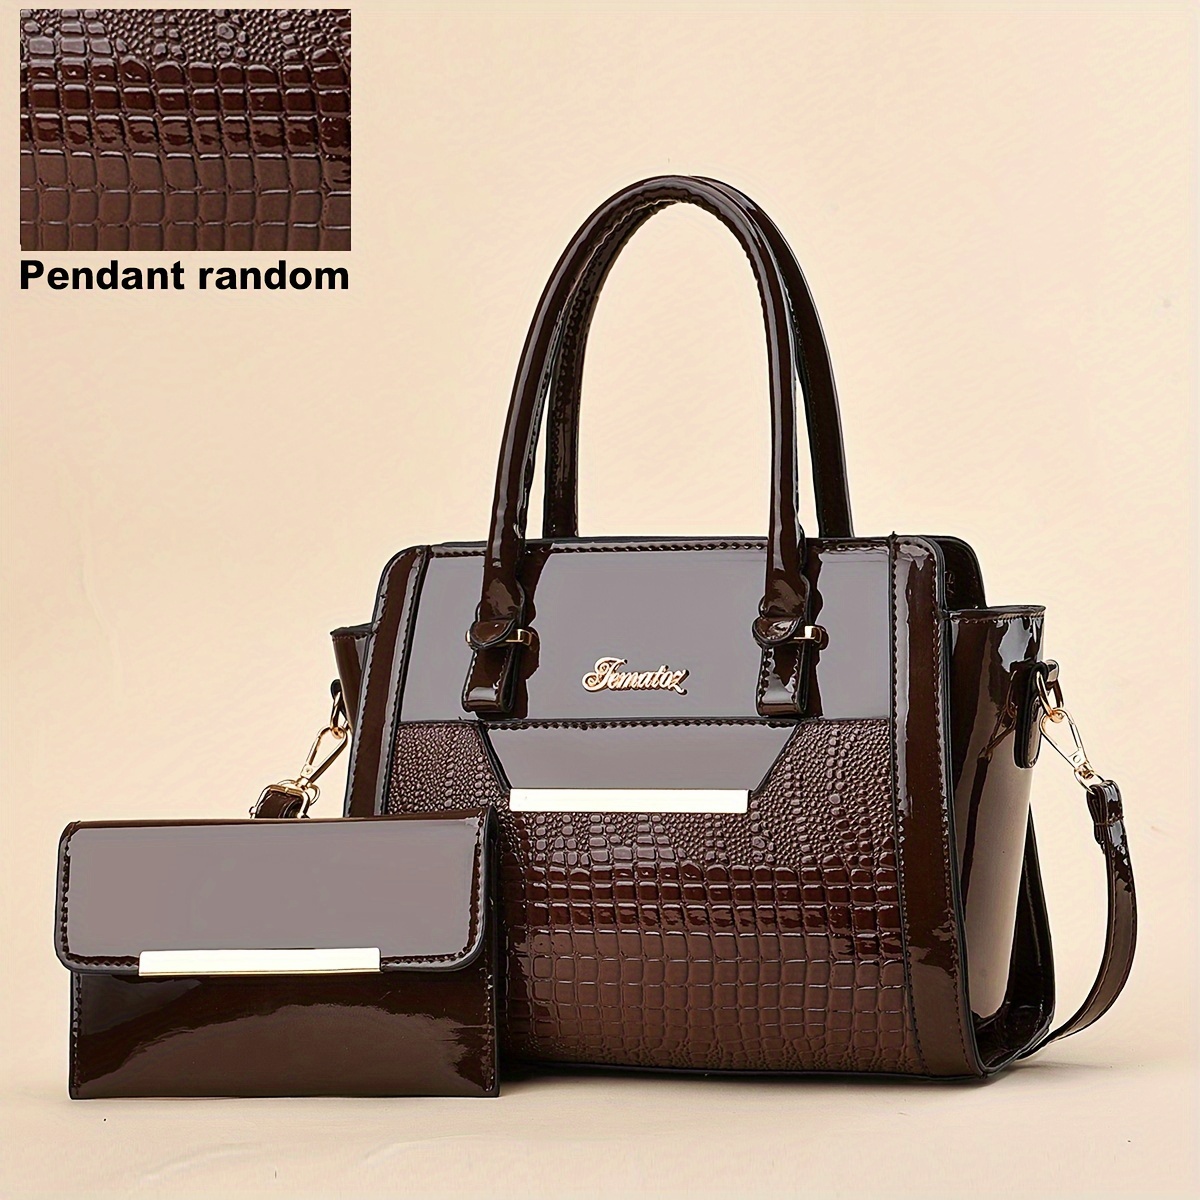 

2pcs Trendy Crocodile Pattern Tote Bag Set, Pu Leather Shoulder Bag & Coin Purse, Perfect Hand Bag For Daily Use